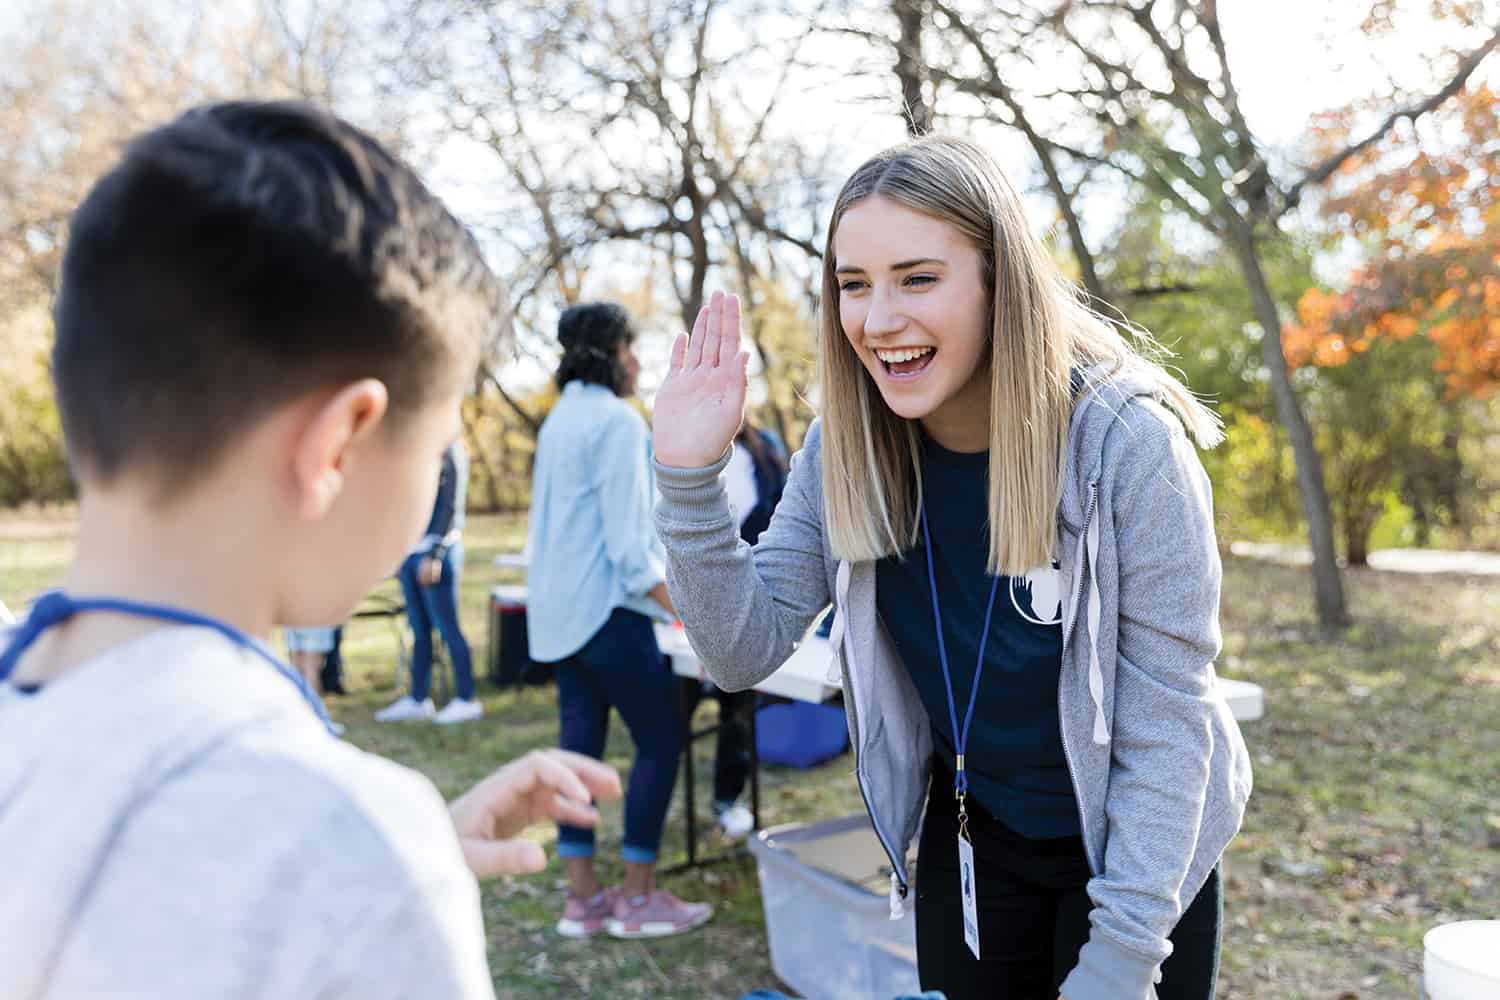 A care worker with hand raised, to high five to a young boy.